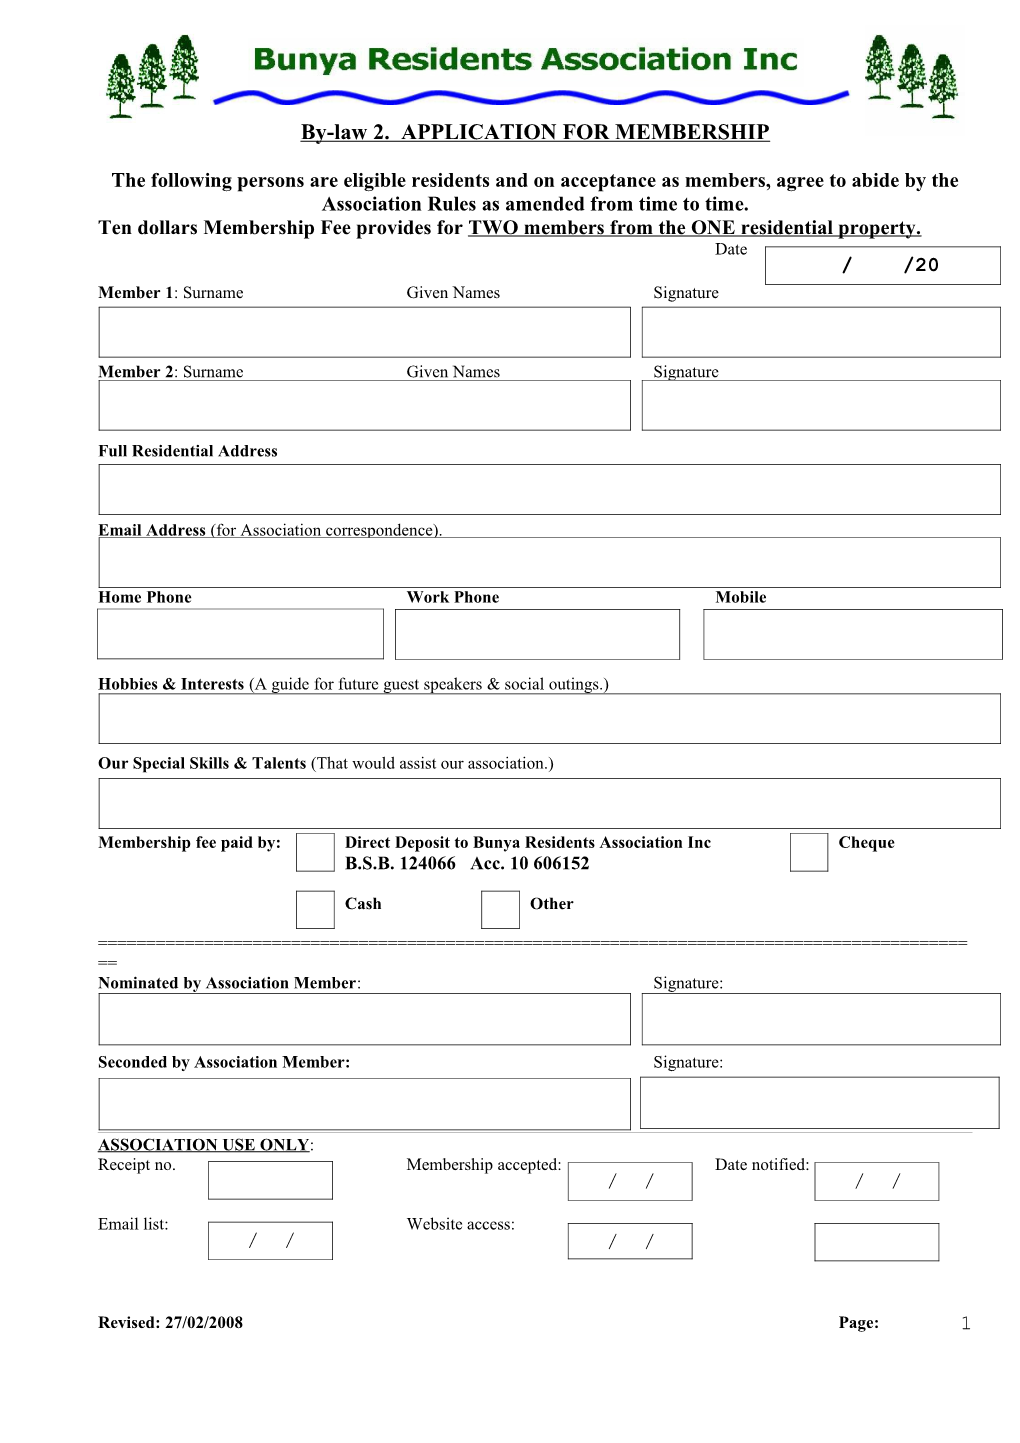 By-Law 2. APPLICATION for MEMBERSHIP